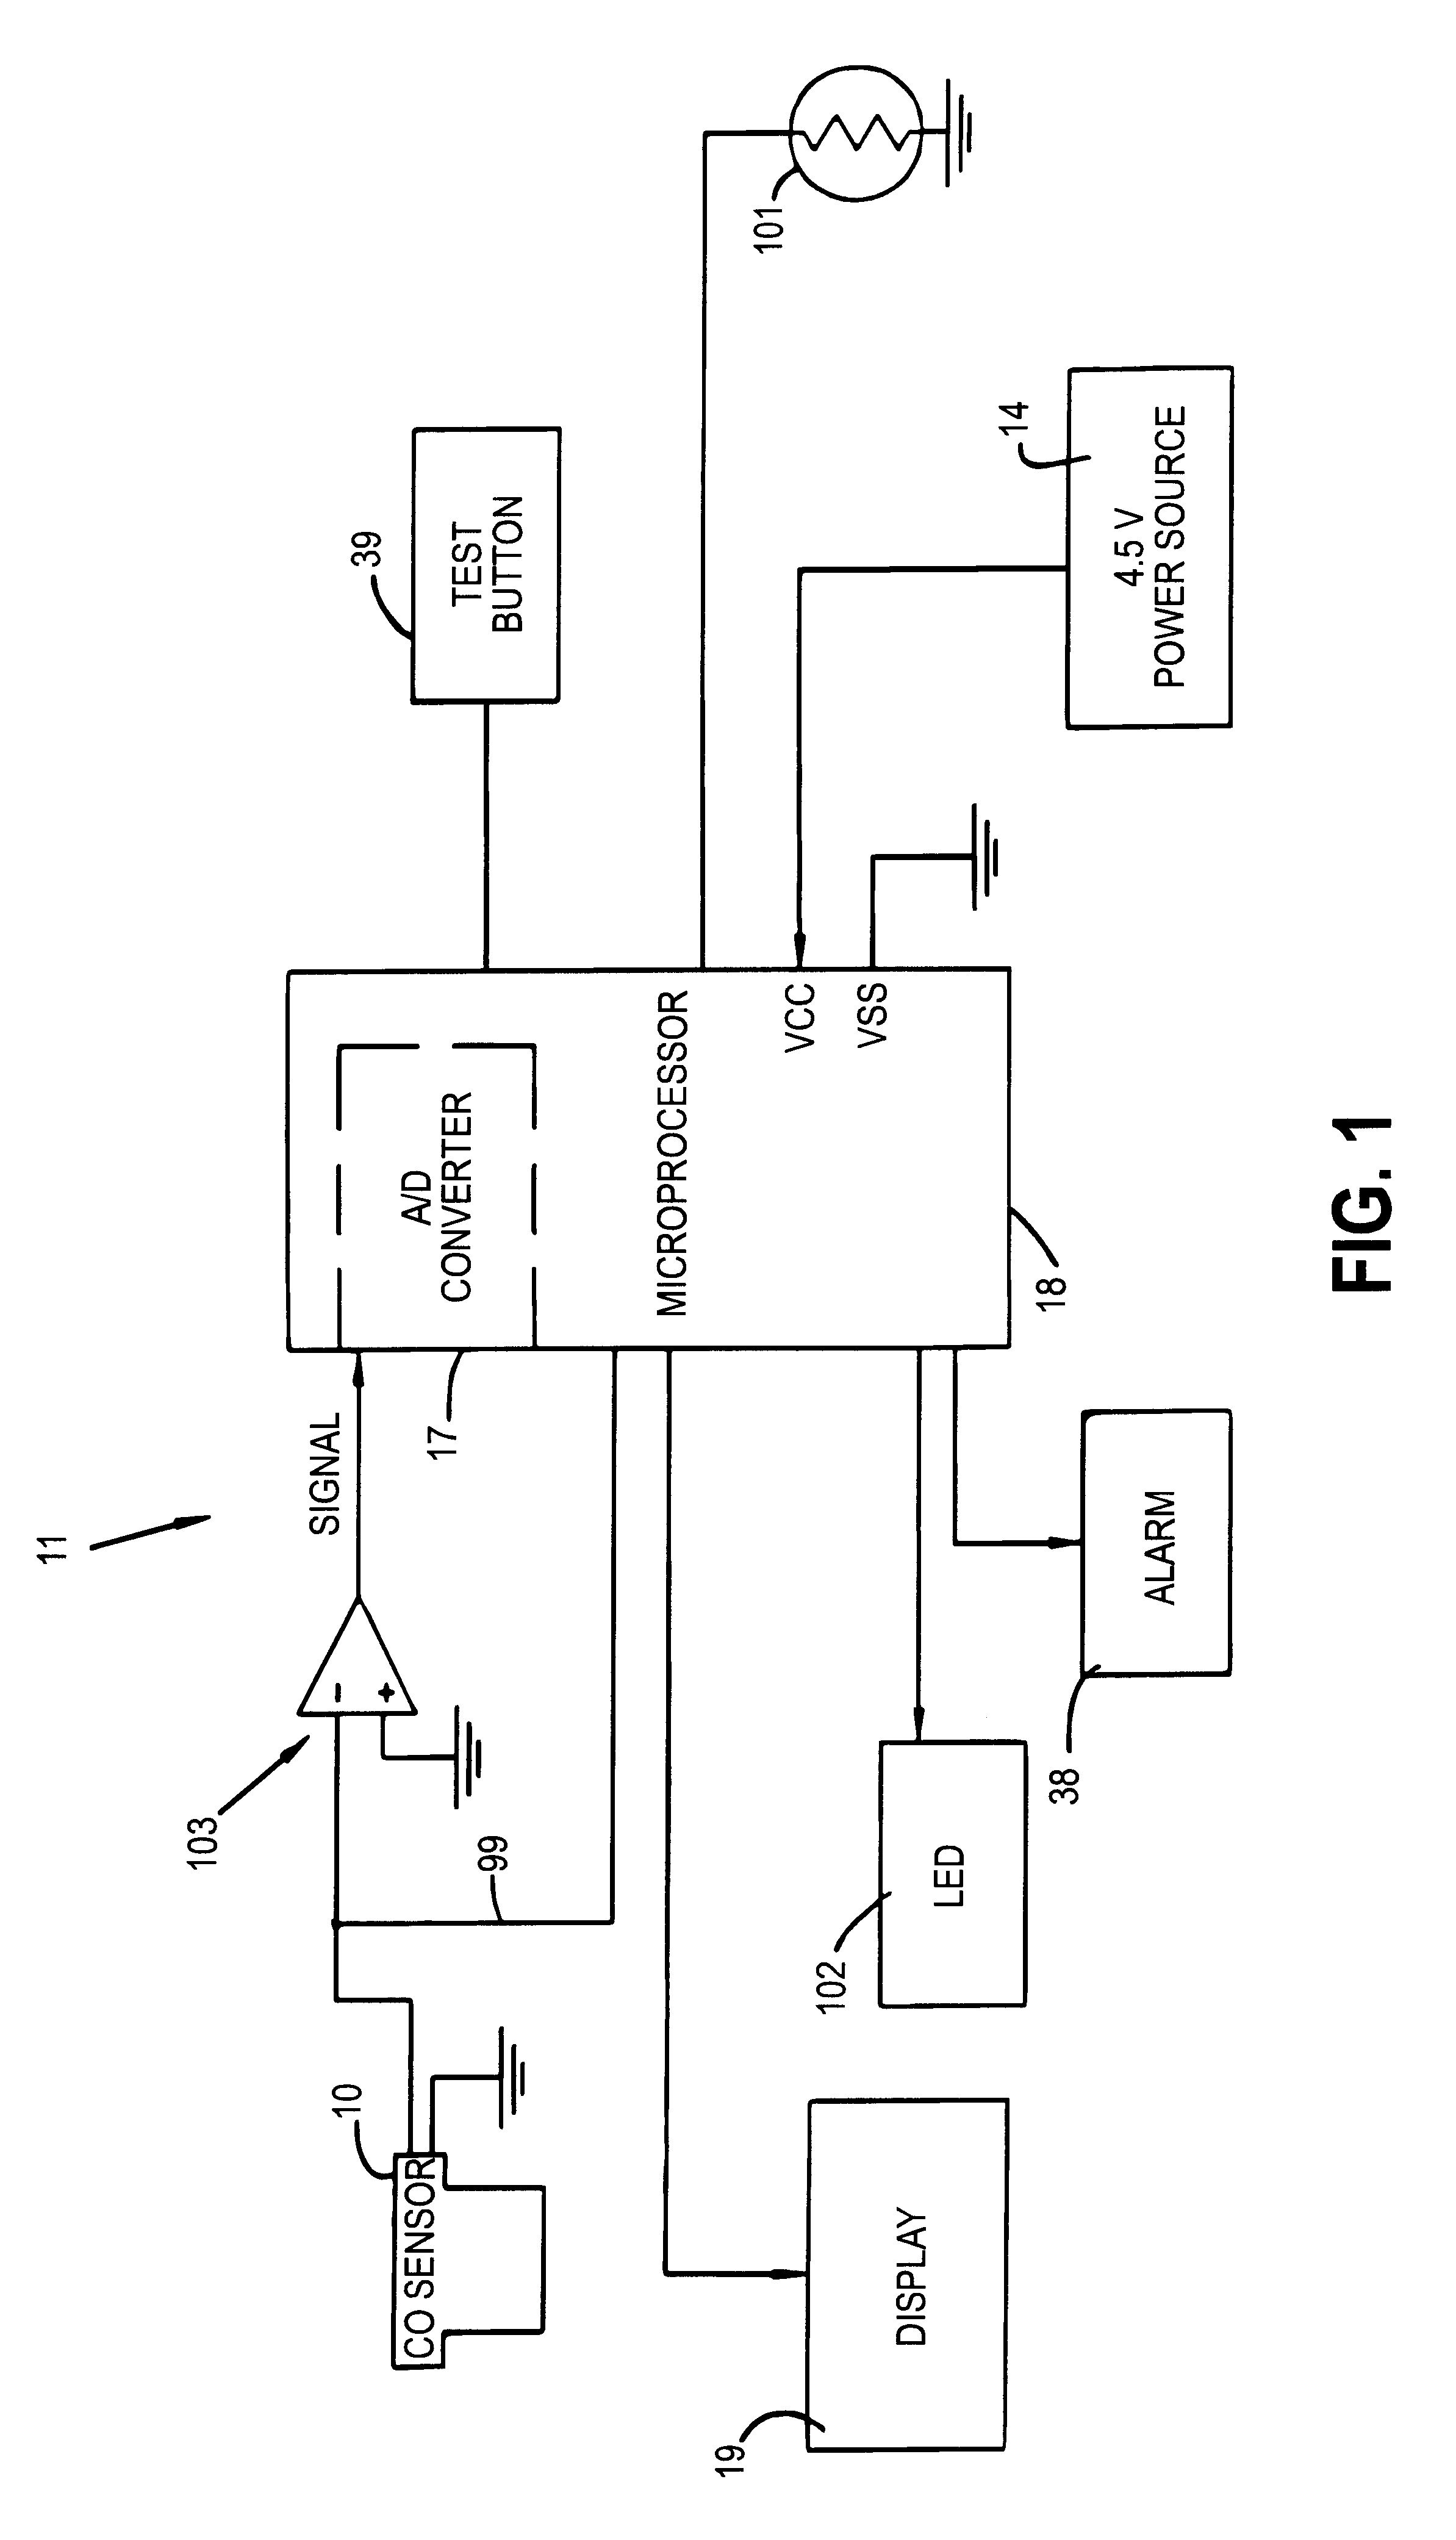 Gas sensor with electrically conductive, hydrophobic membranes